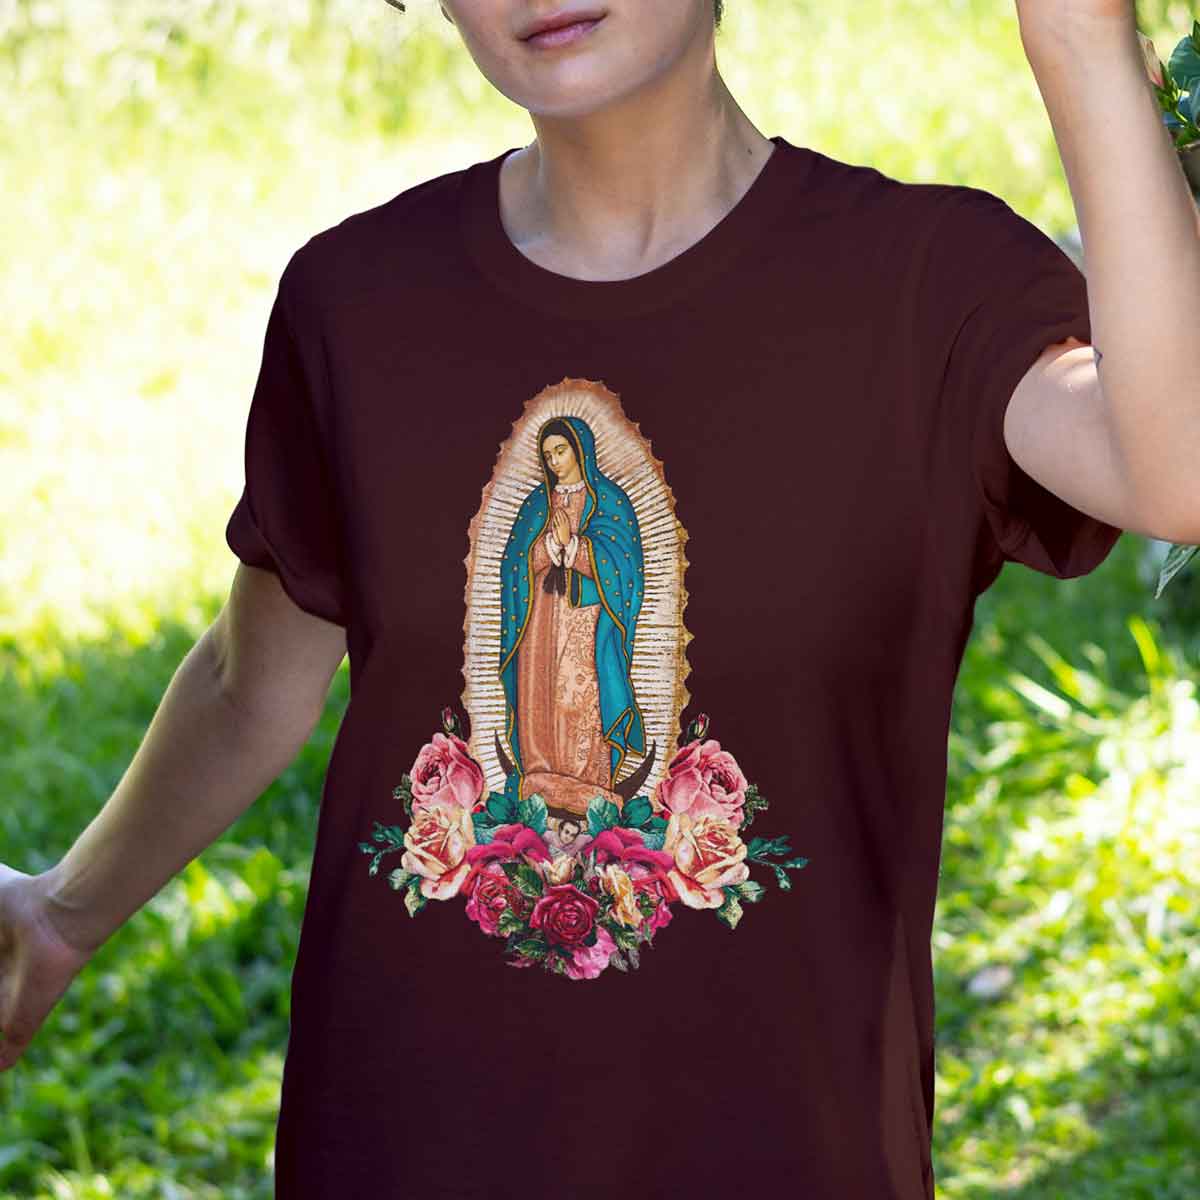 FREE First Month - Catholic T-Shirt Subscription for Women